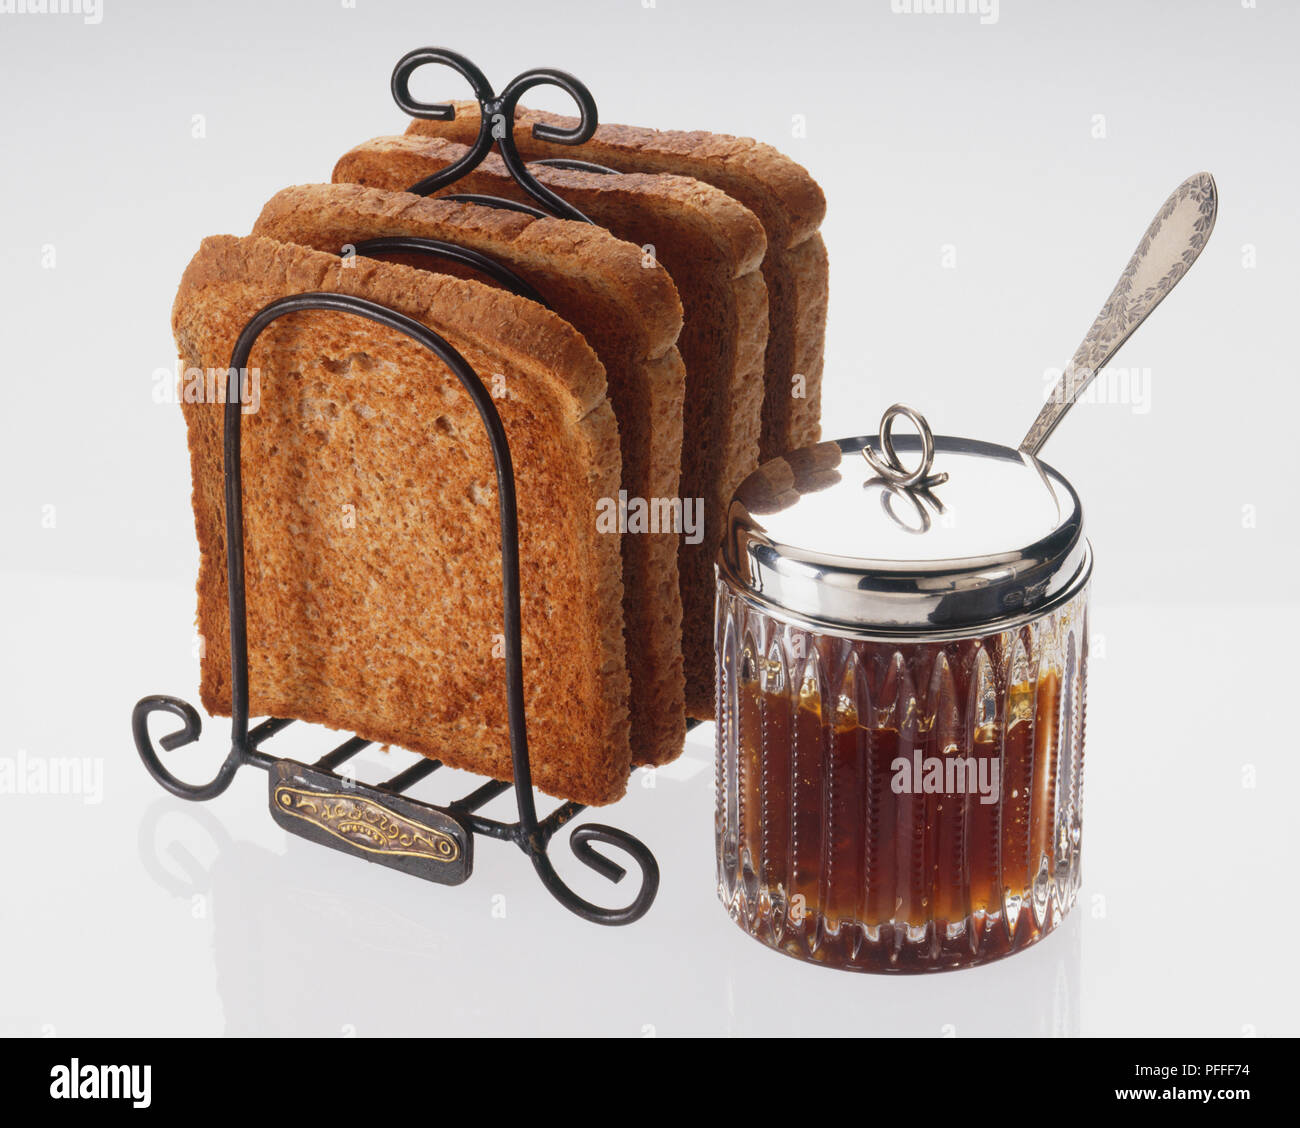 https://c8.alamy.com/comp/PFFF74/jam-served-in-a-glass-jar-with-a-silver-lid-and-a-spoon-and-a-toast-rack-containing-four-sliced-of-toasted-bread-PFFF74.jpg